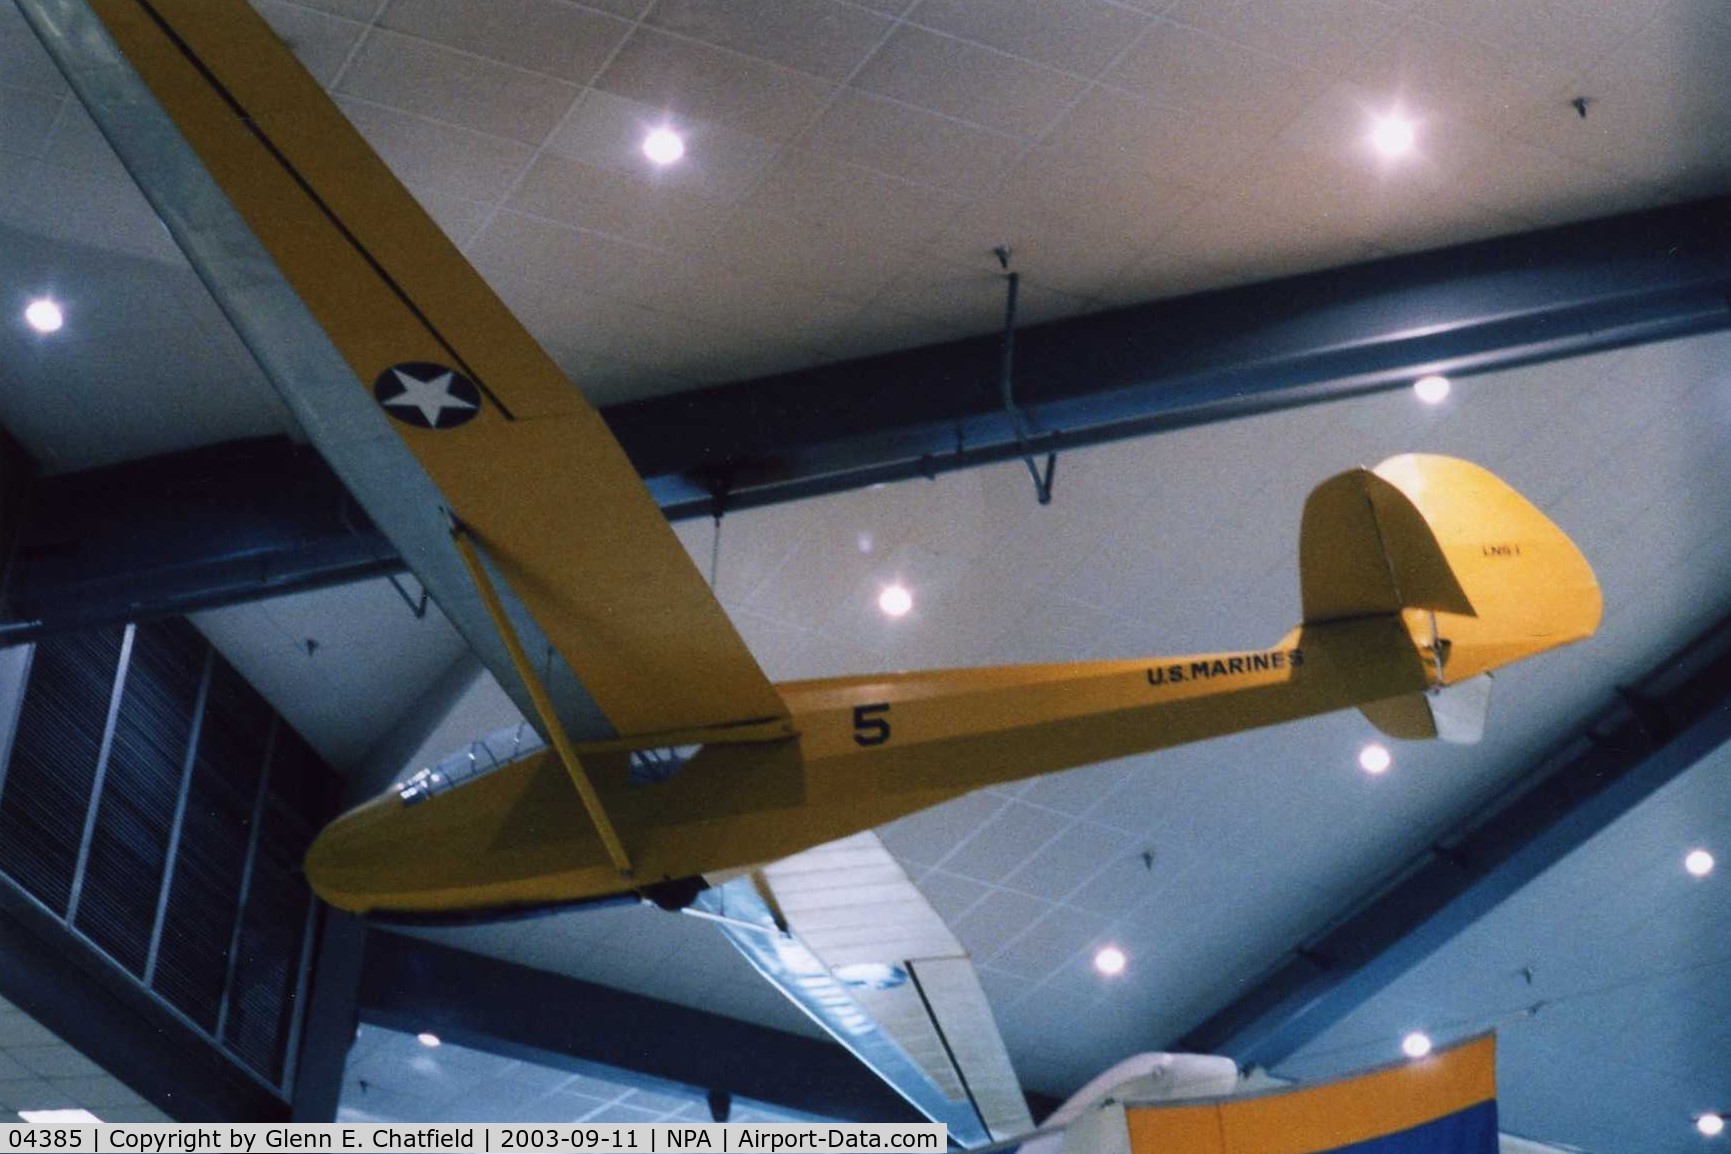 04385, Schweizer LNS-1 C/N 7, LNS-1 training glider at the National Museum of Naval Aviation